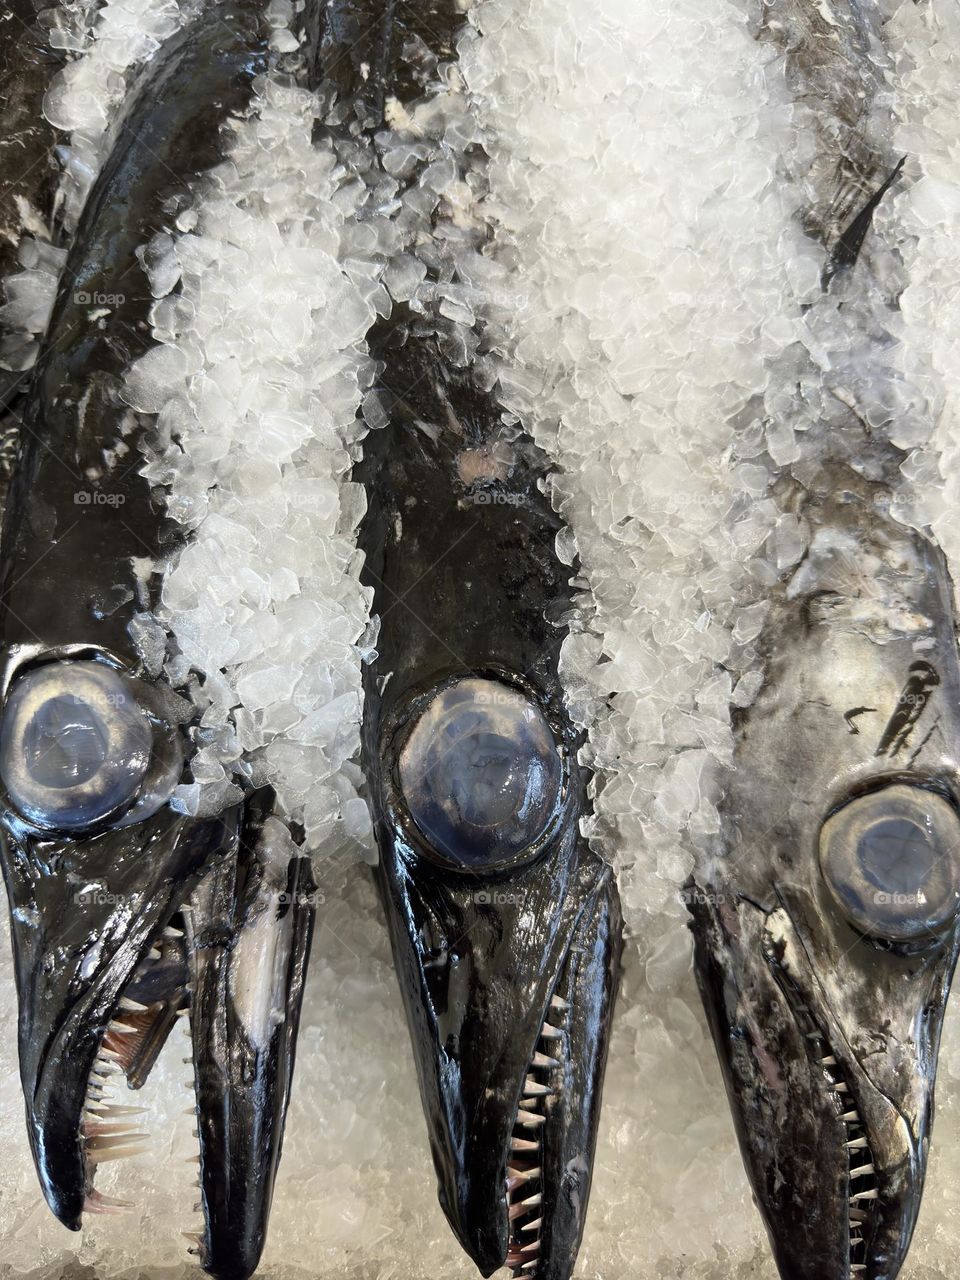 Looking down on a close up of the black scabbard fish covered in ice at the Sunday market 